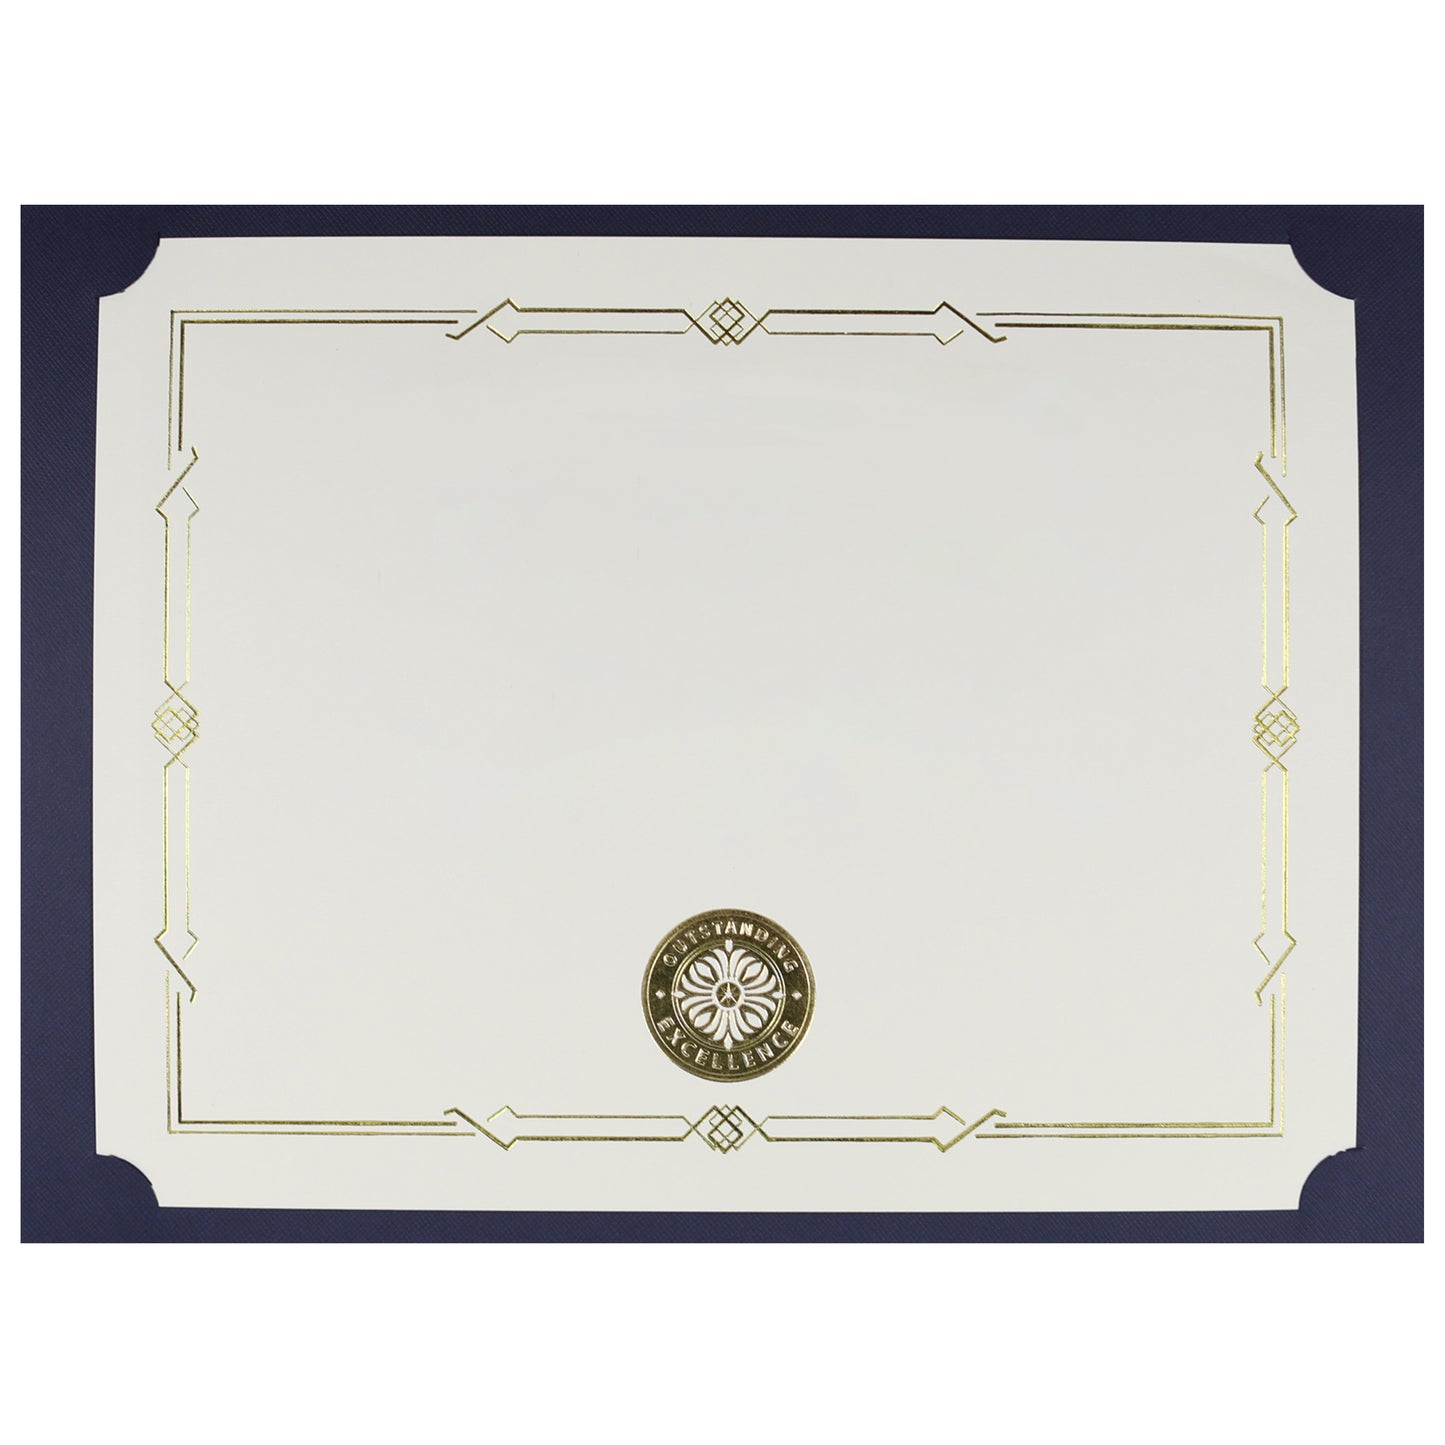 St. James® Certificate Holders/Document Covers/Diploma Holders, Navy Blue, Gold Award Seal with Blue Ribbon, Pack of 5, 83814